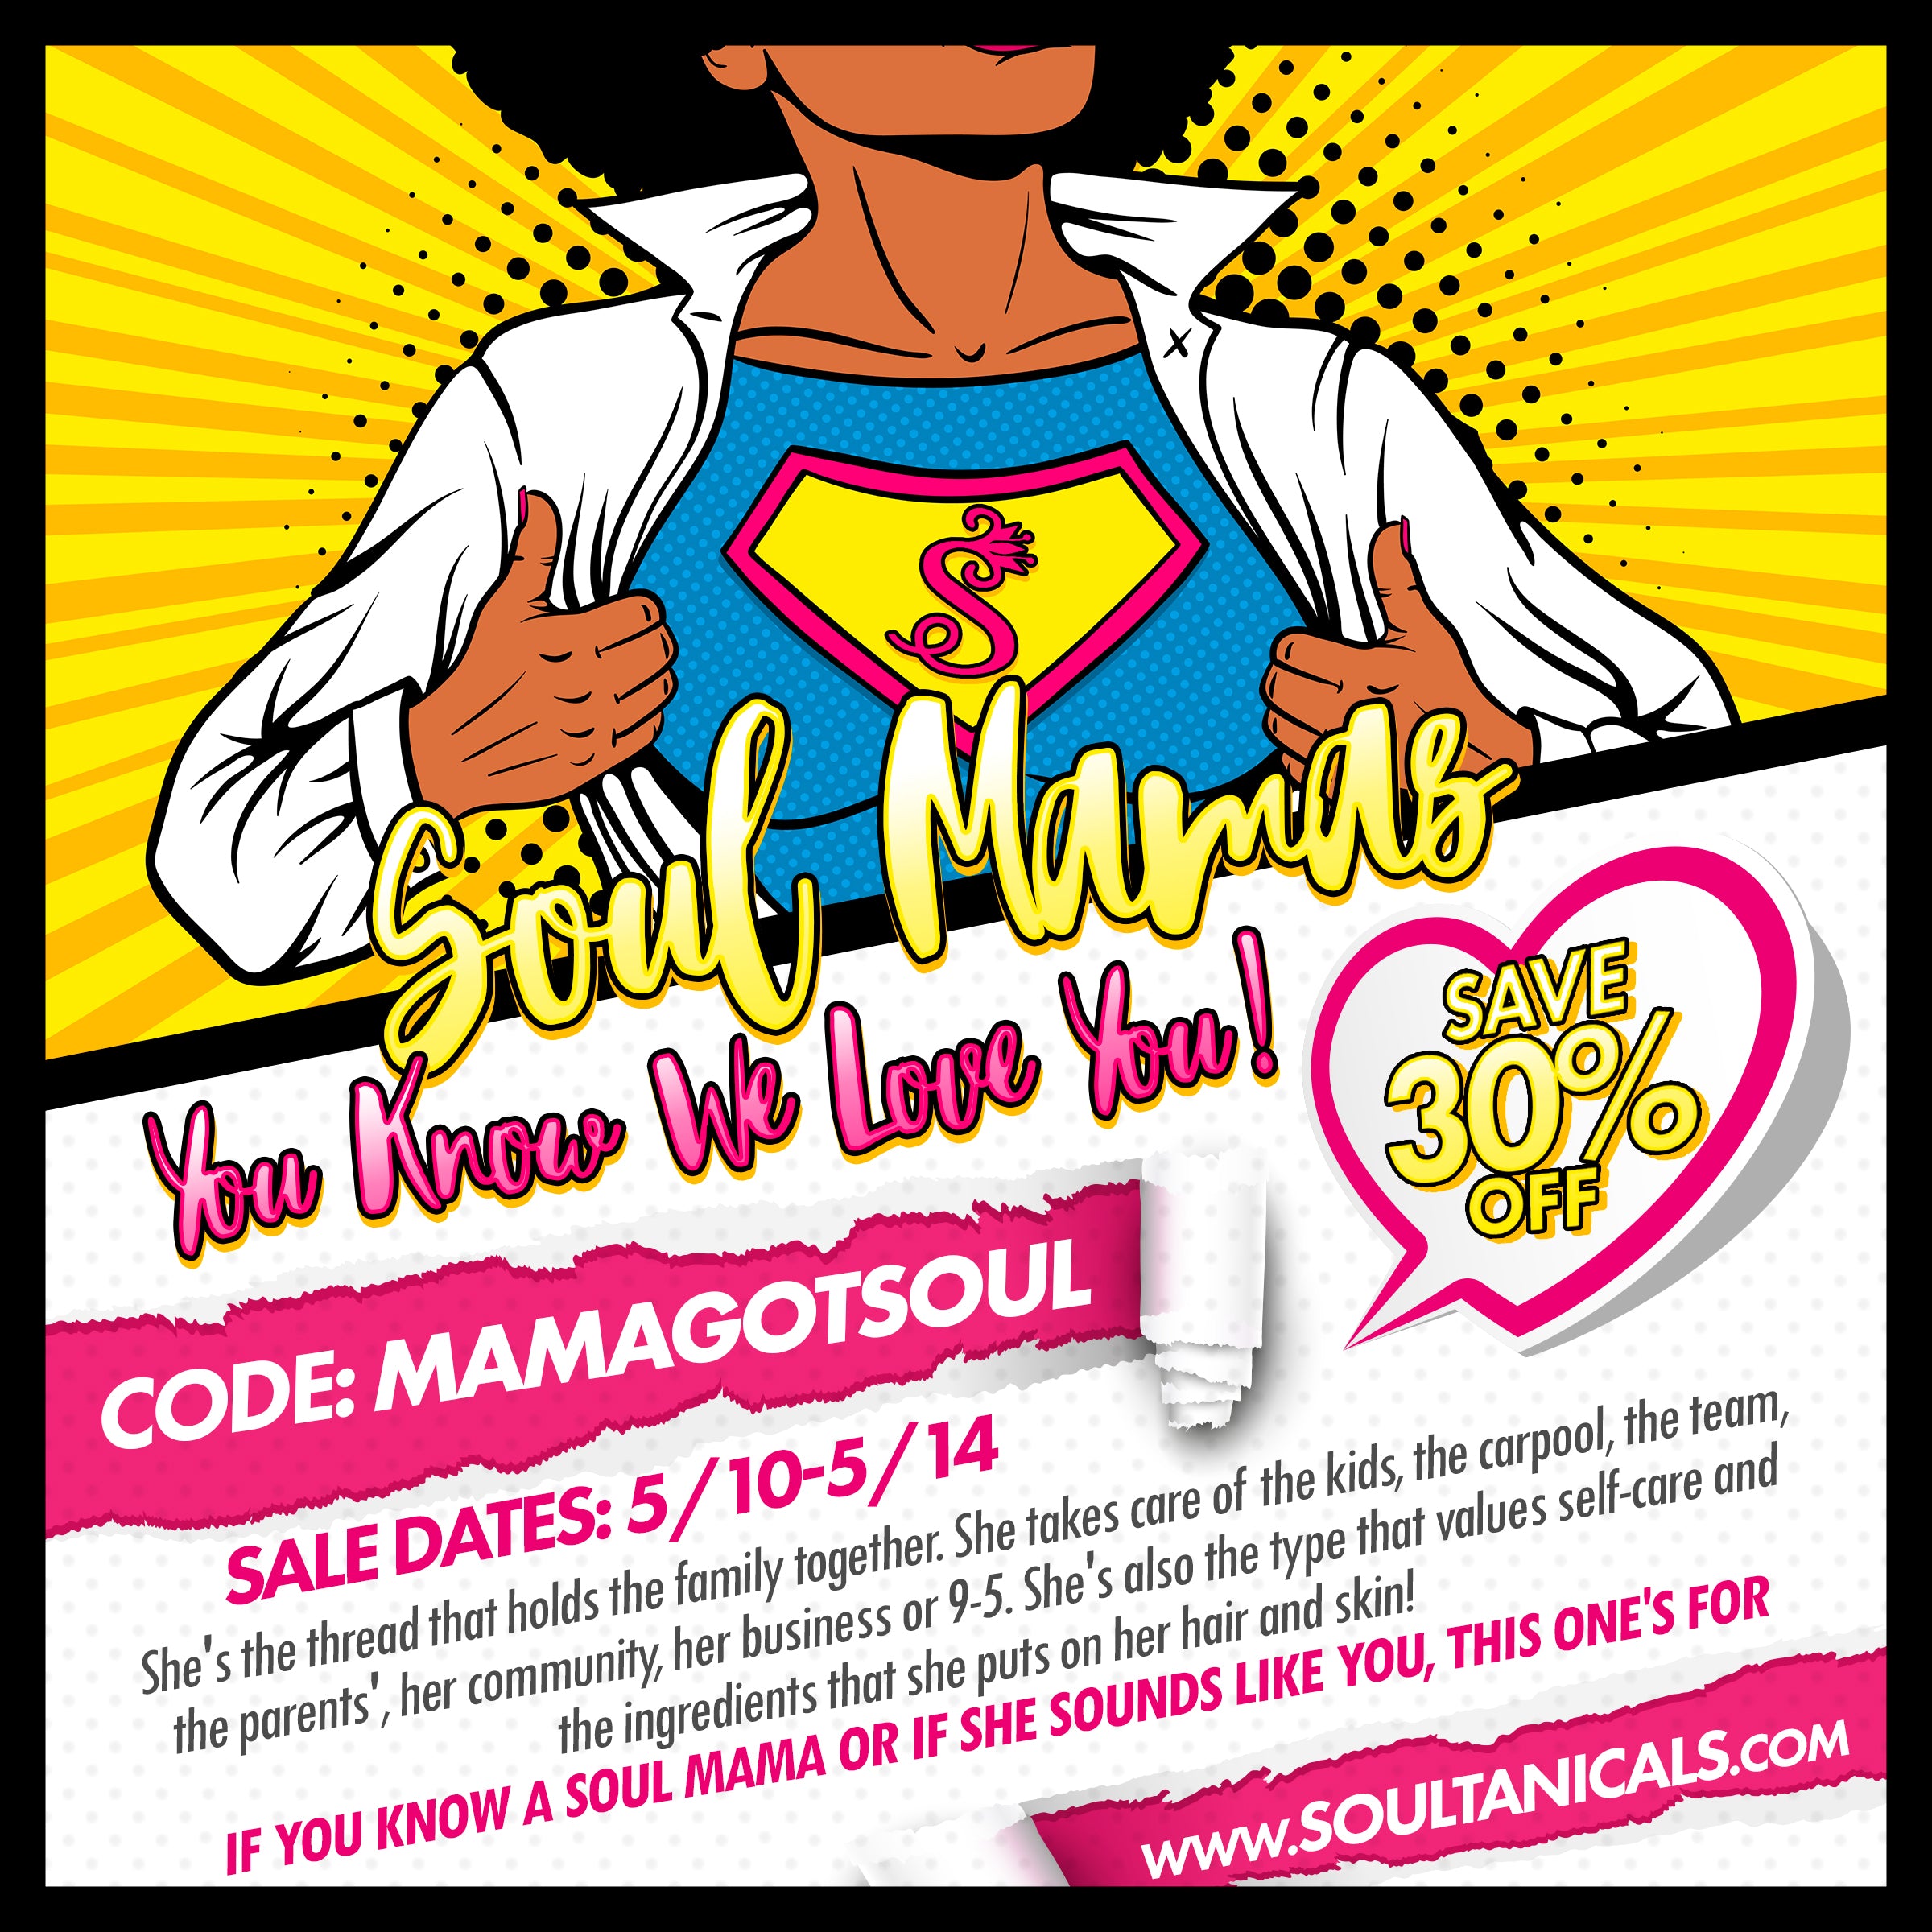 Mama Got Soul! Save 30% Off this Mother's Day Weekend!